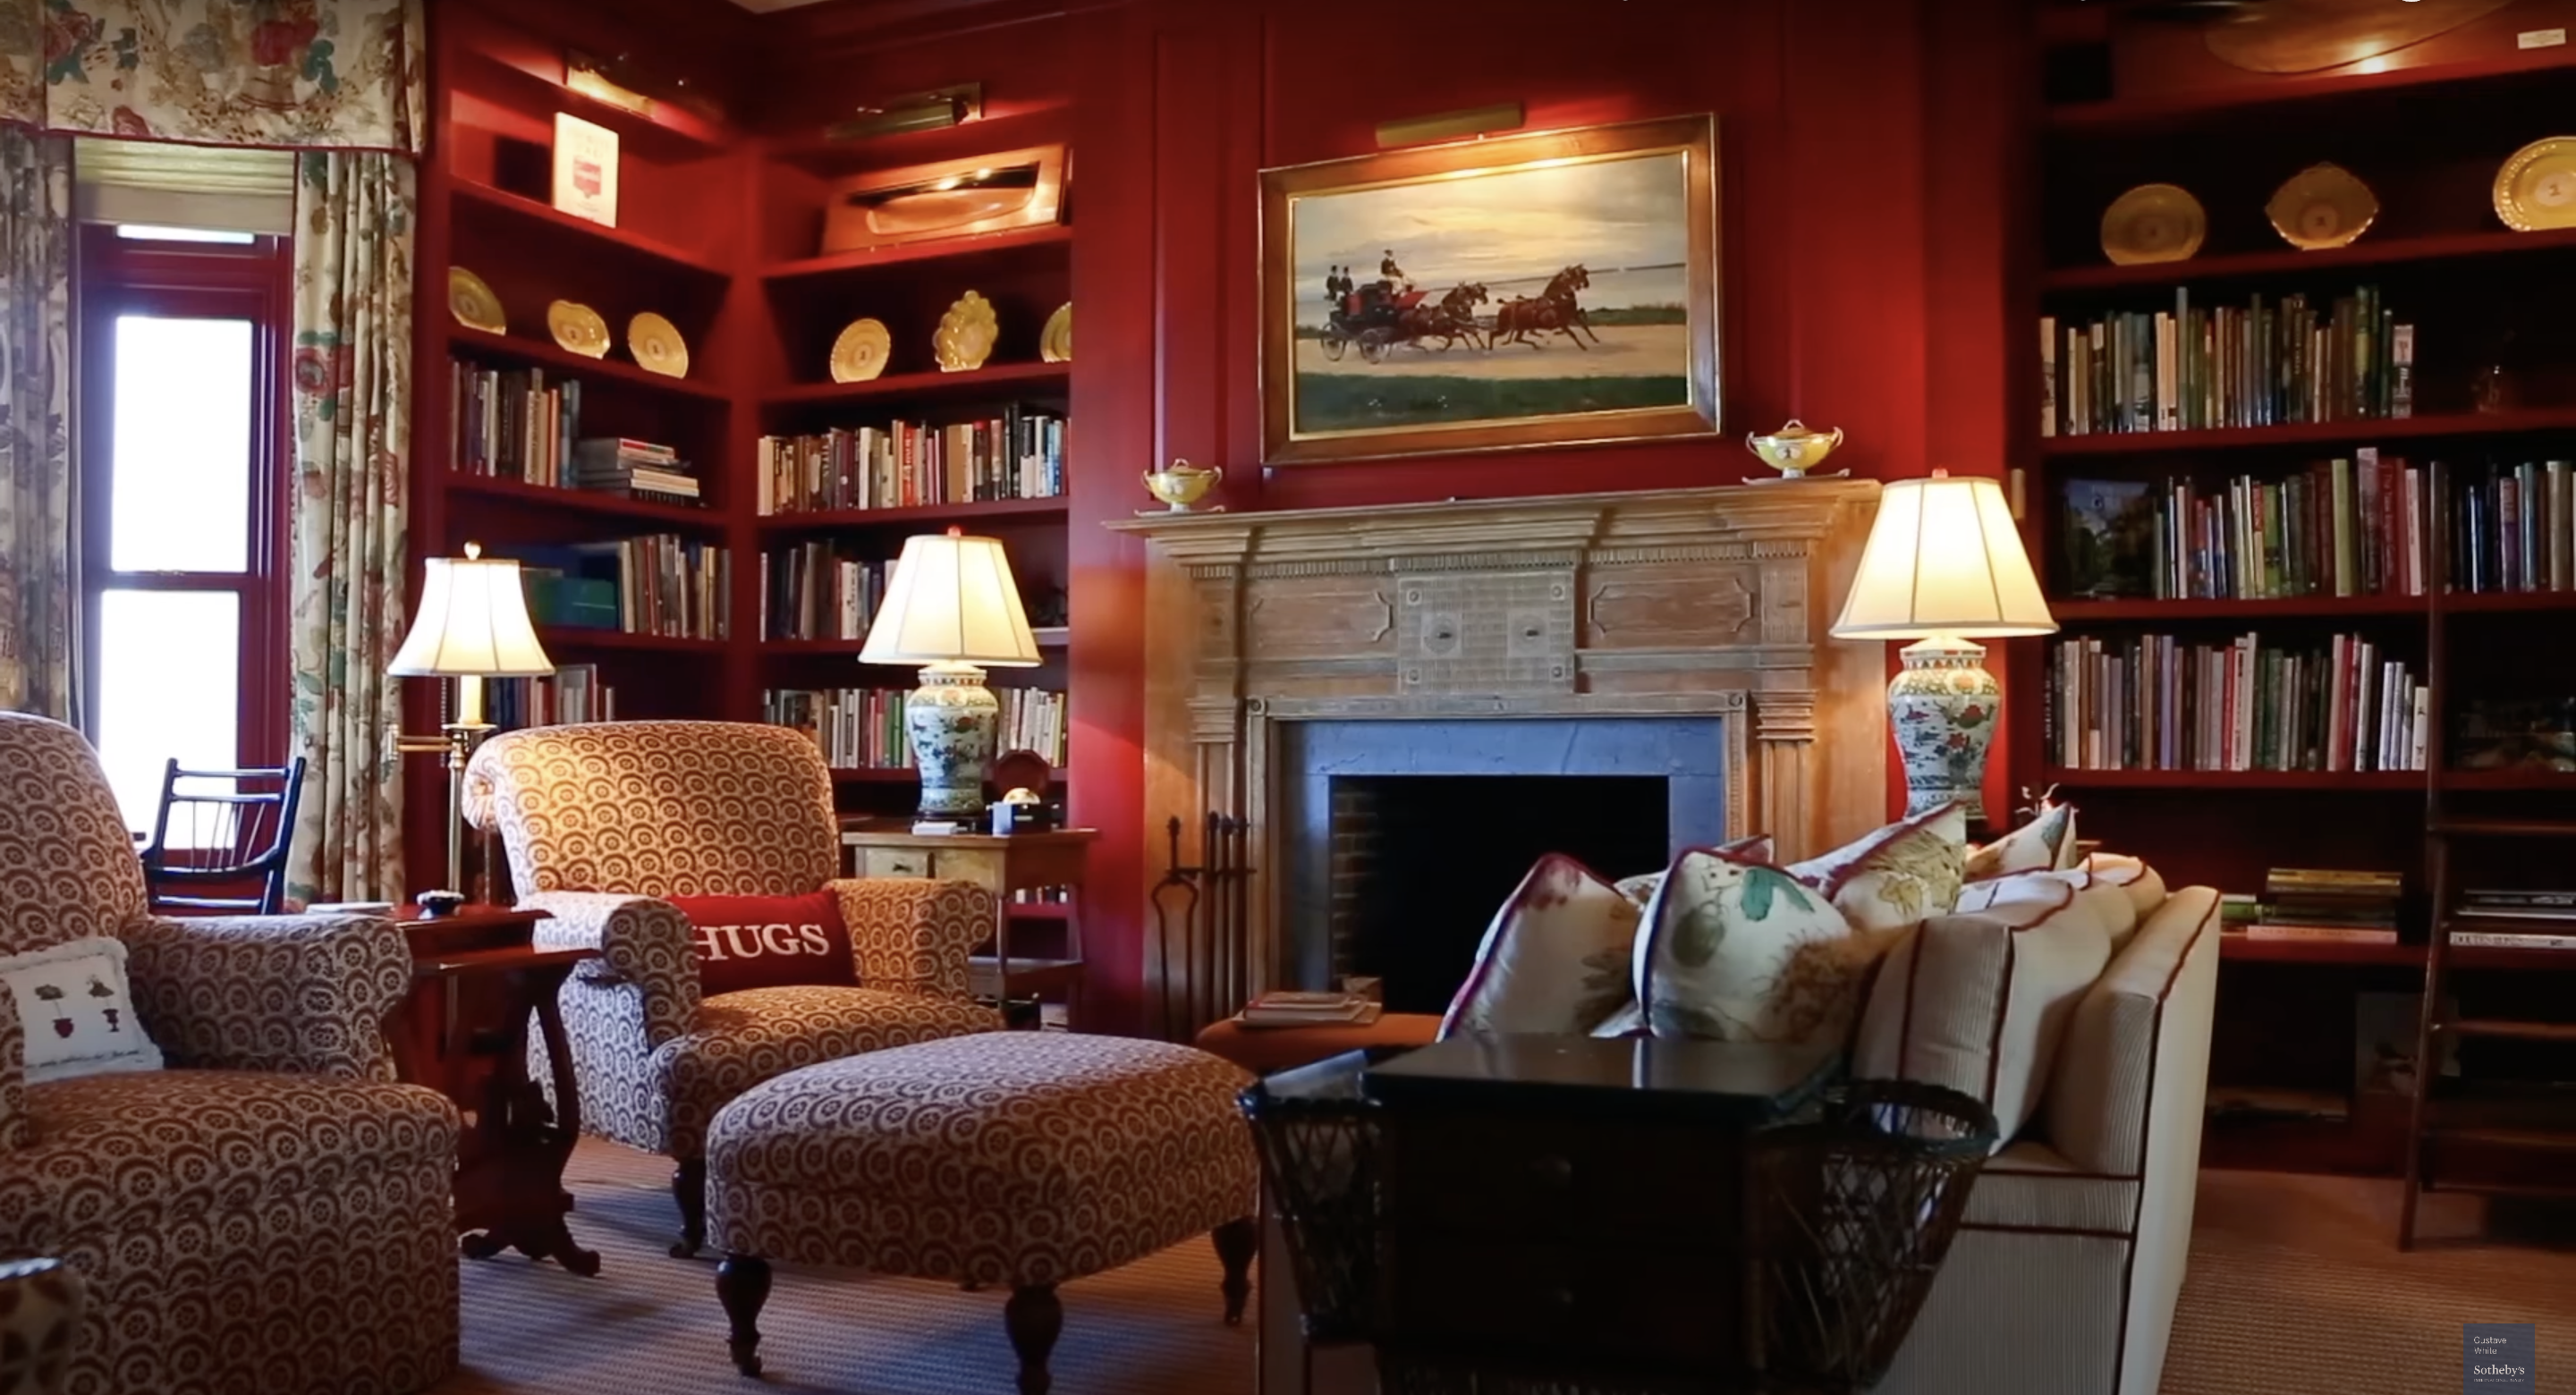 Inside Judge Judy's home in Newport, Rhode Island | Source: Youtube.com/Gustave White Sotheby's International Realty